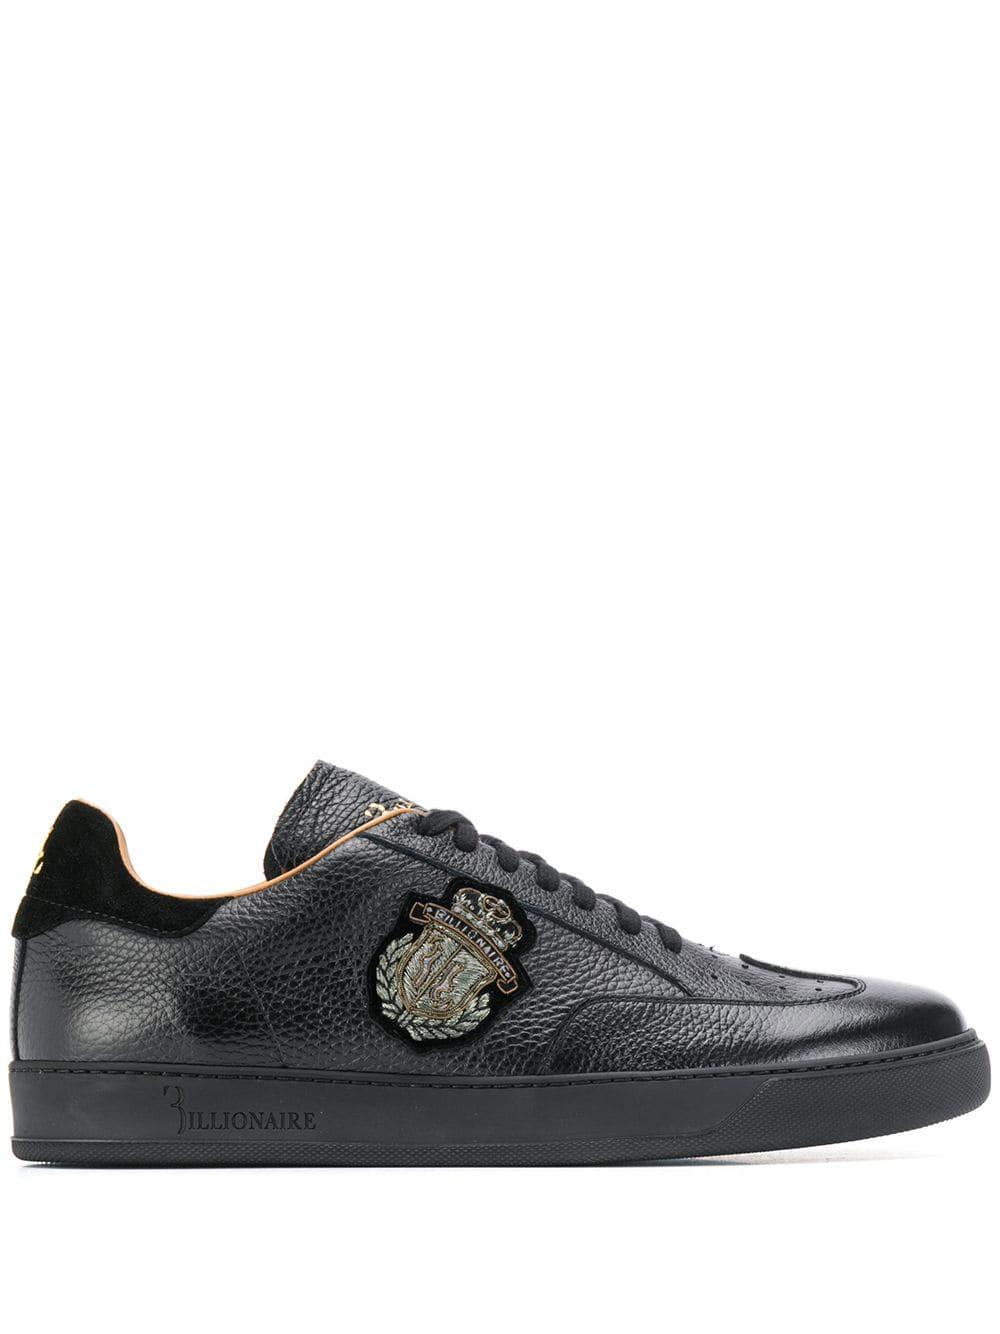 Billionaire Leather Lace Up Sneakers in Black for Men - Lyst